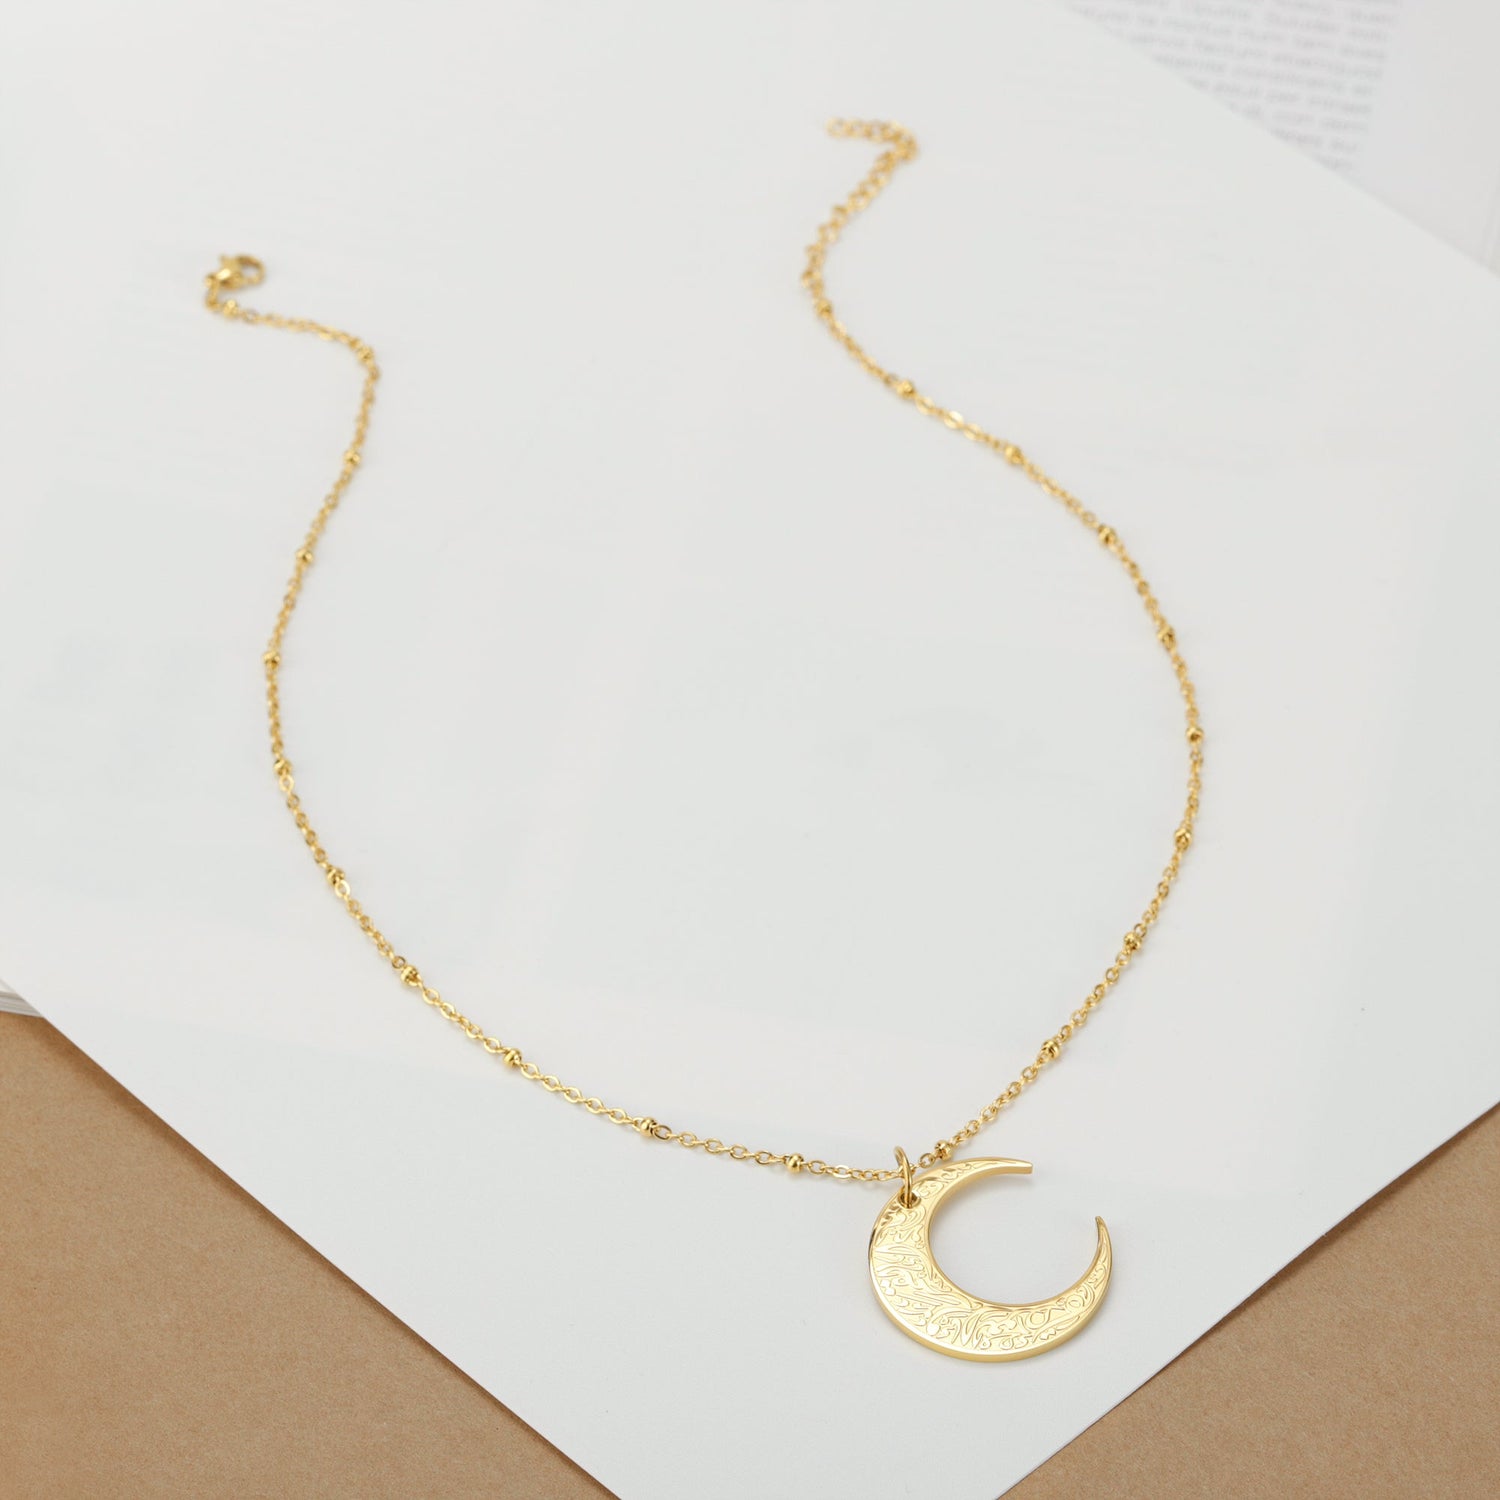 Crescent Moon Necklace | Arabic Moon Necklace | Getdawah